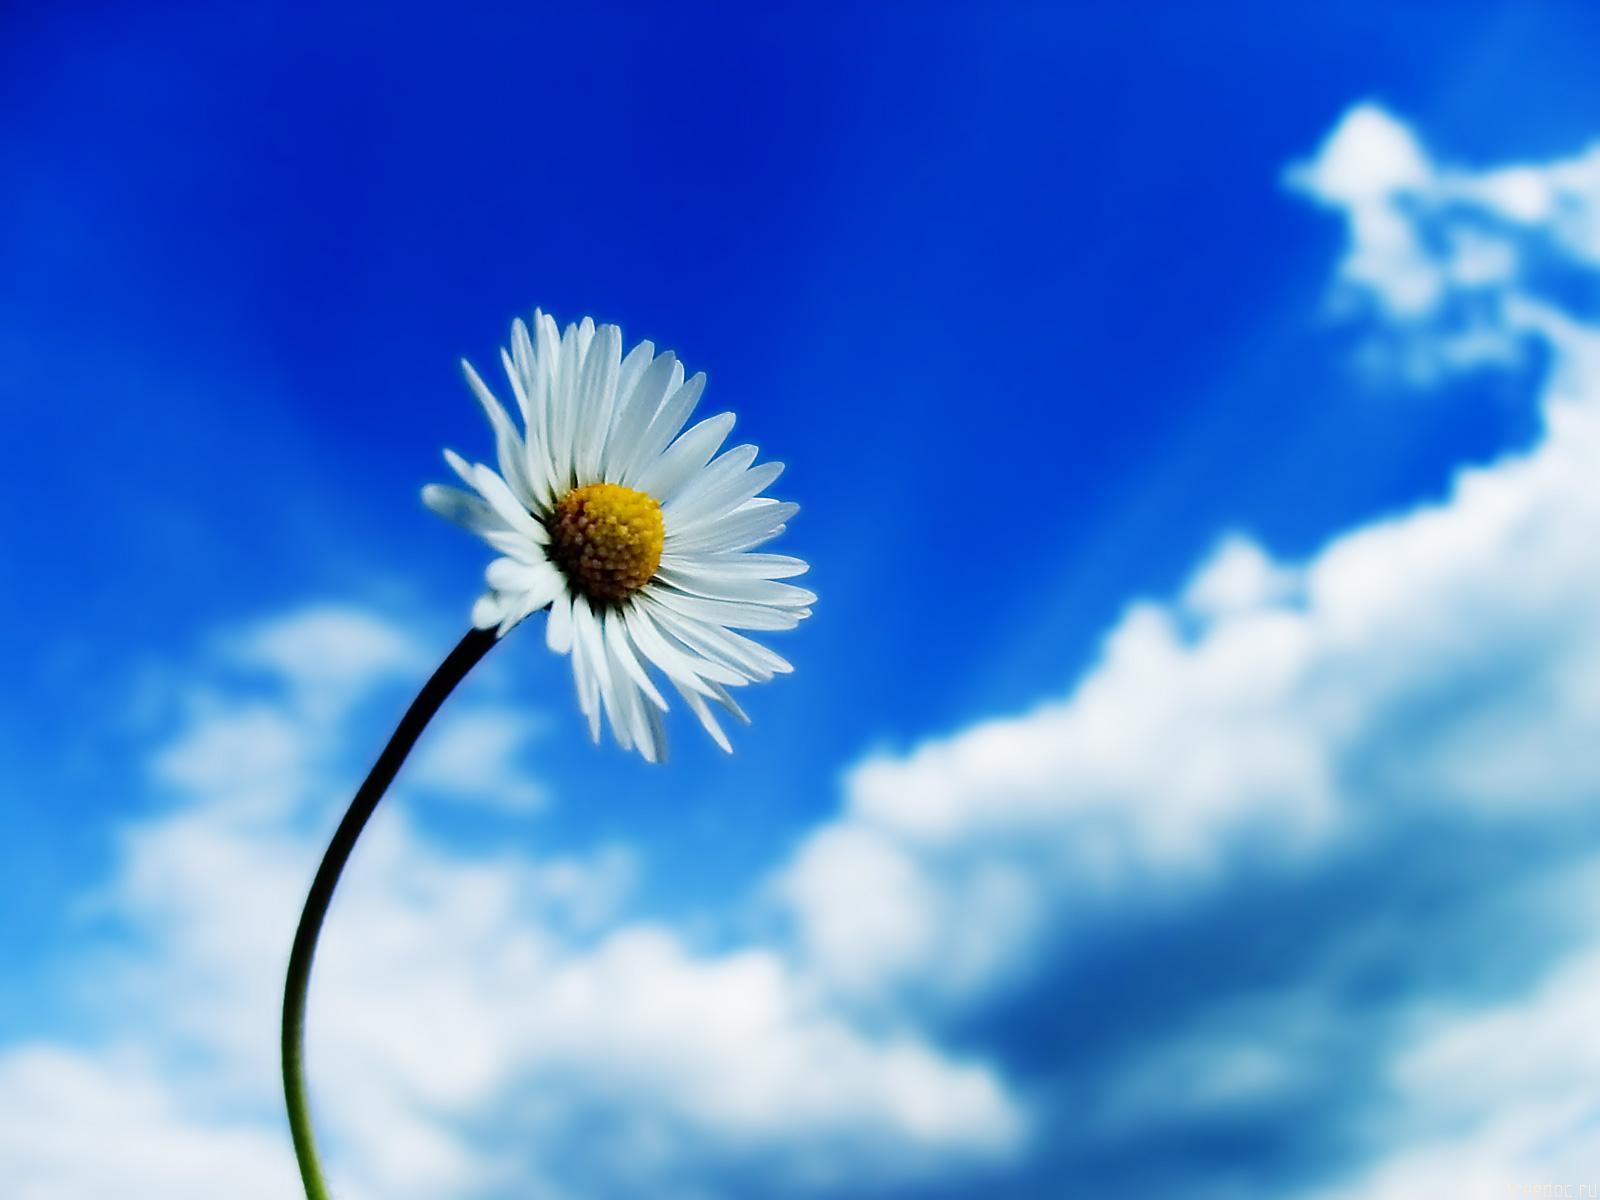 beautiful sky single white daisy flower normal cool wallpaper photos